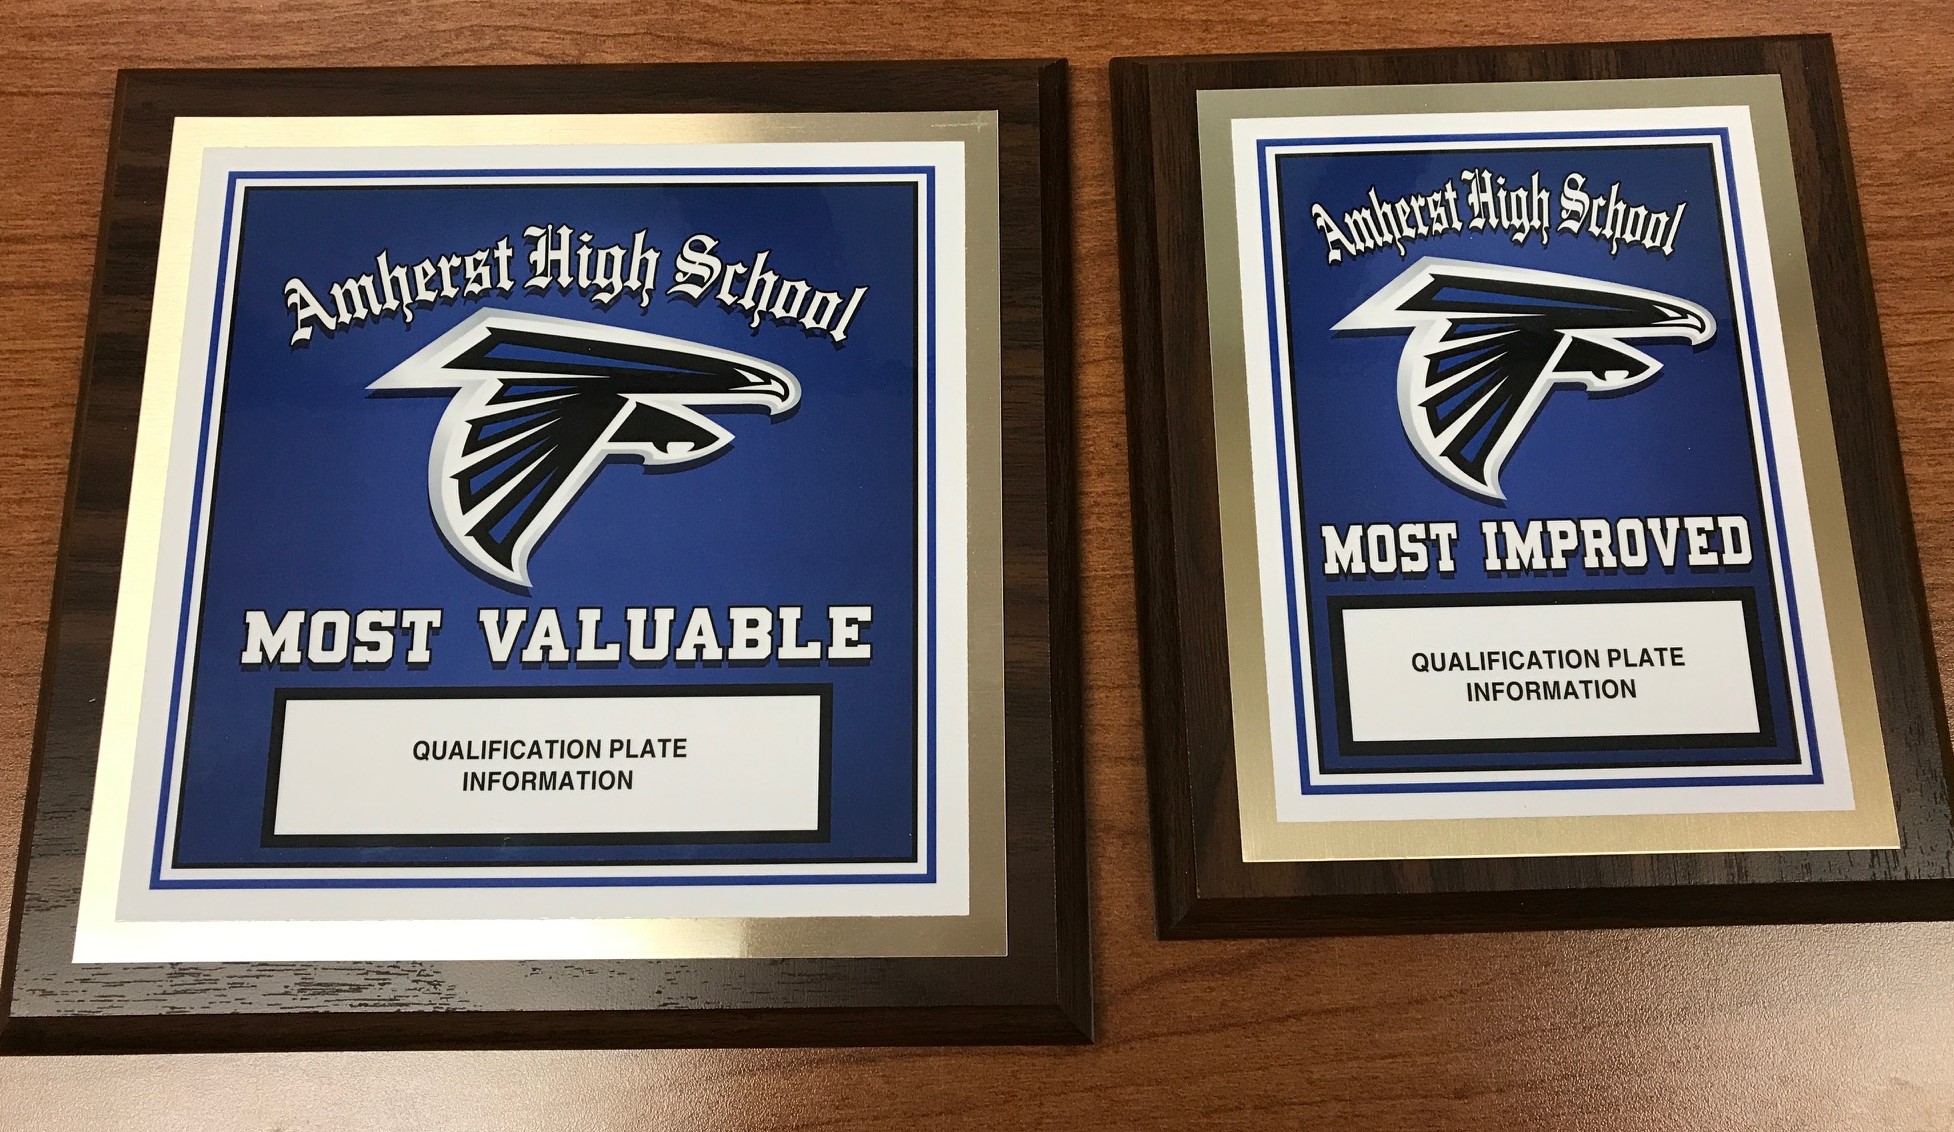 Most Valuable Player and Most Improved Player plaques